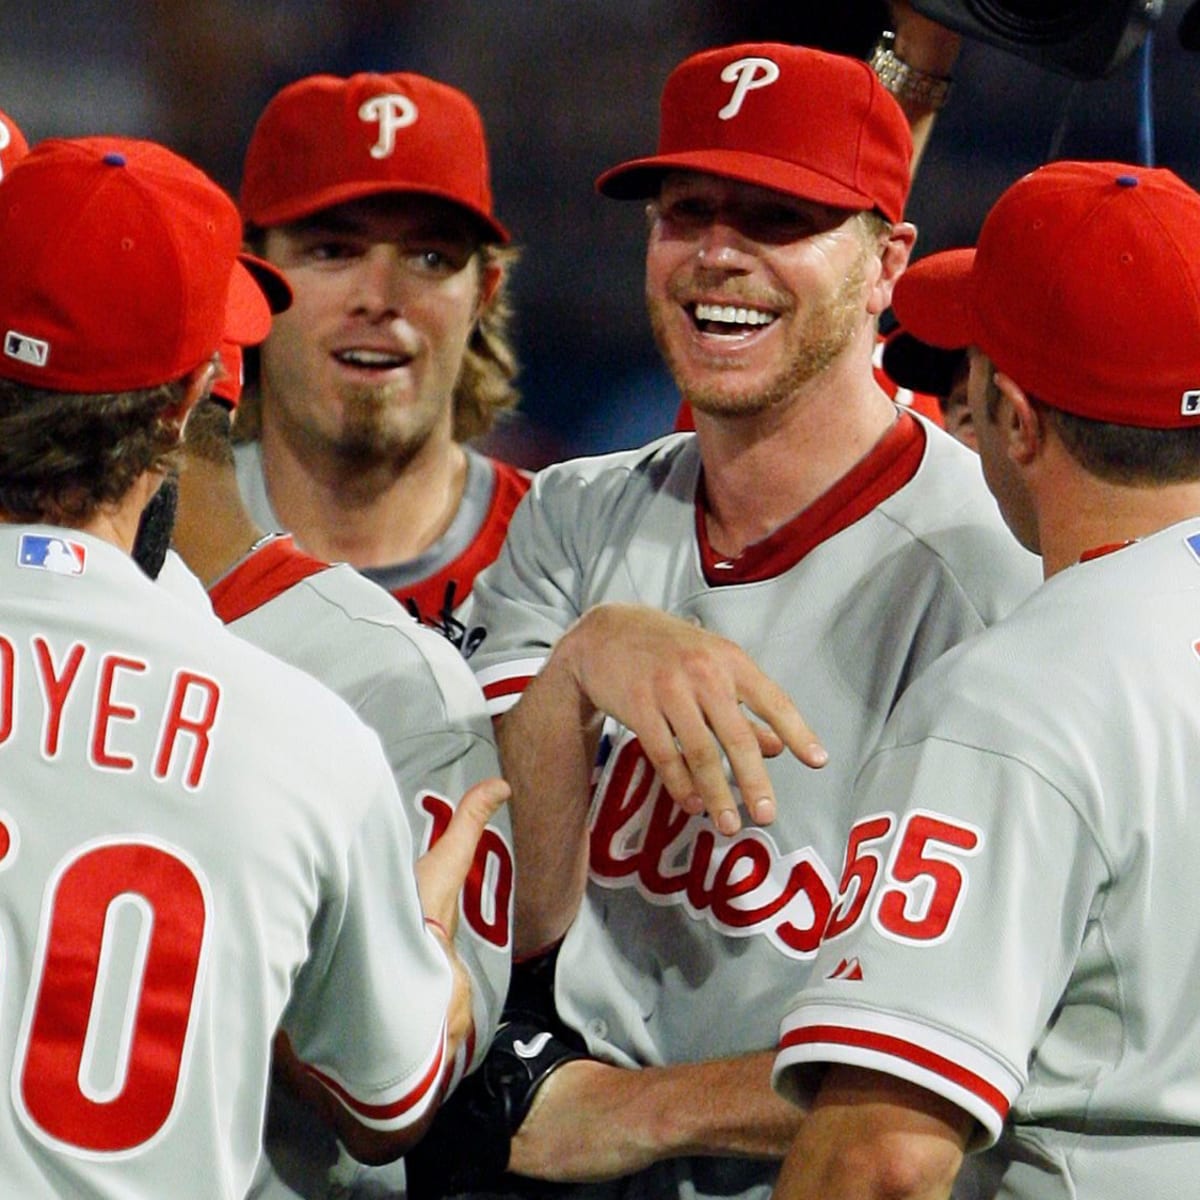 Phillies retire late pitcher Roy Halladay's No. 34, the 7th player